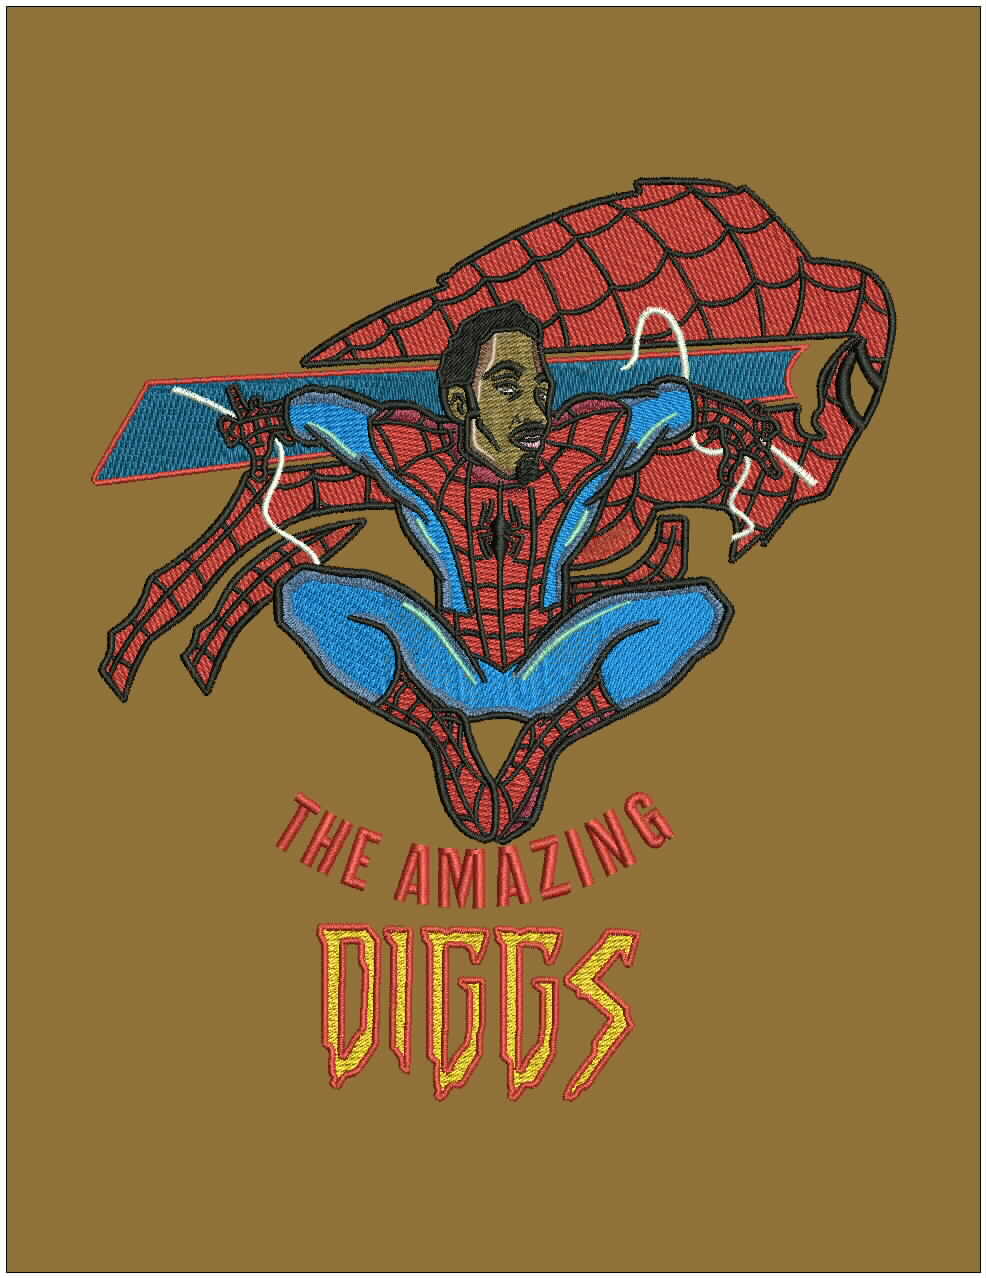 OR-3092 spidy diggs Logo ED1 Sew